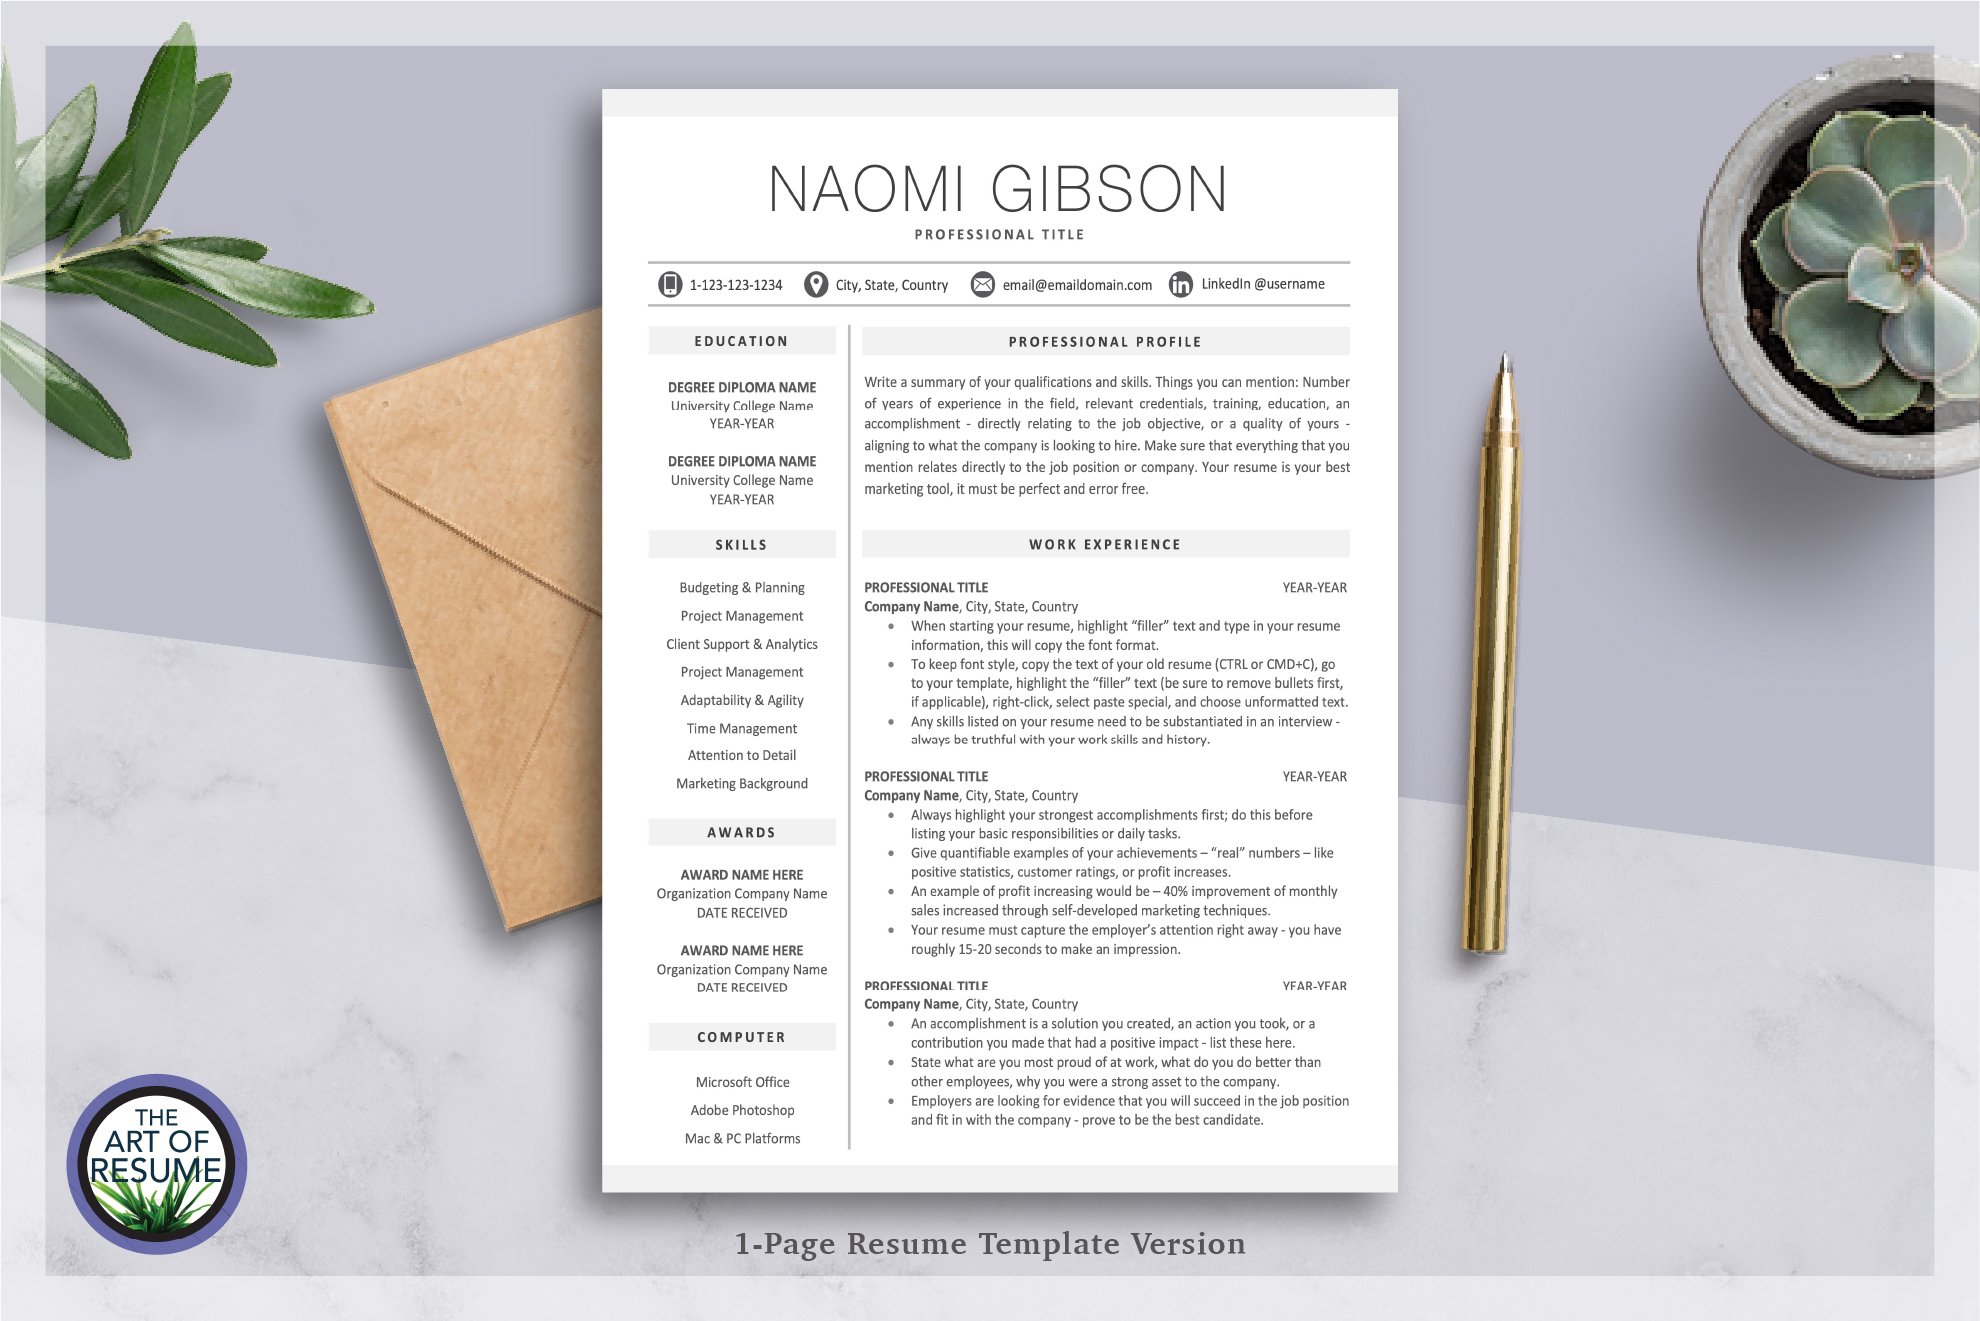 Best Resume CV Template | Mac & PC preview image.